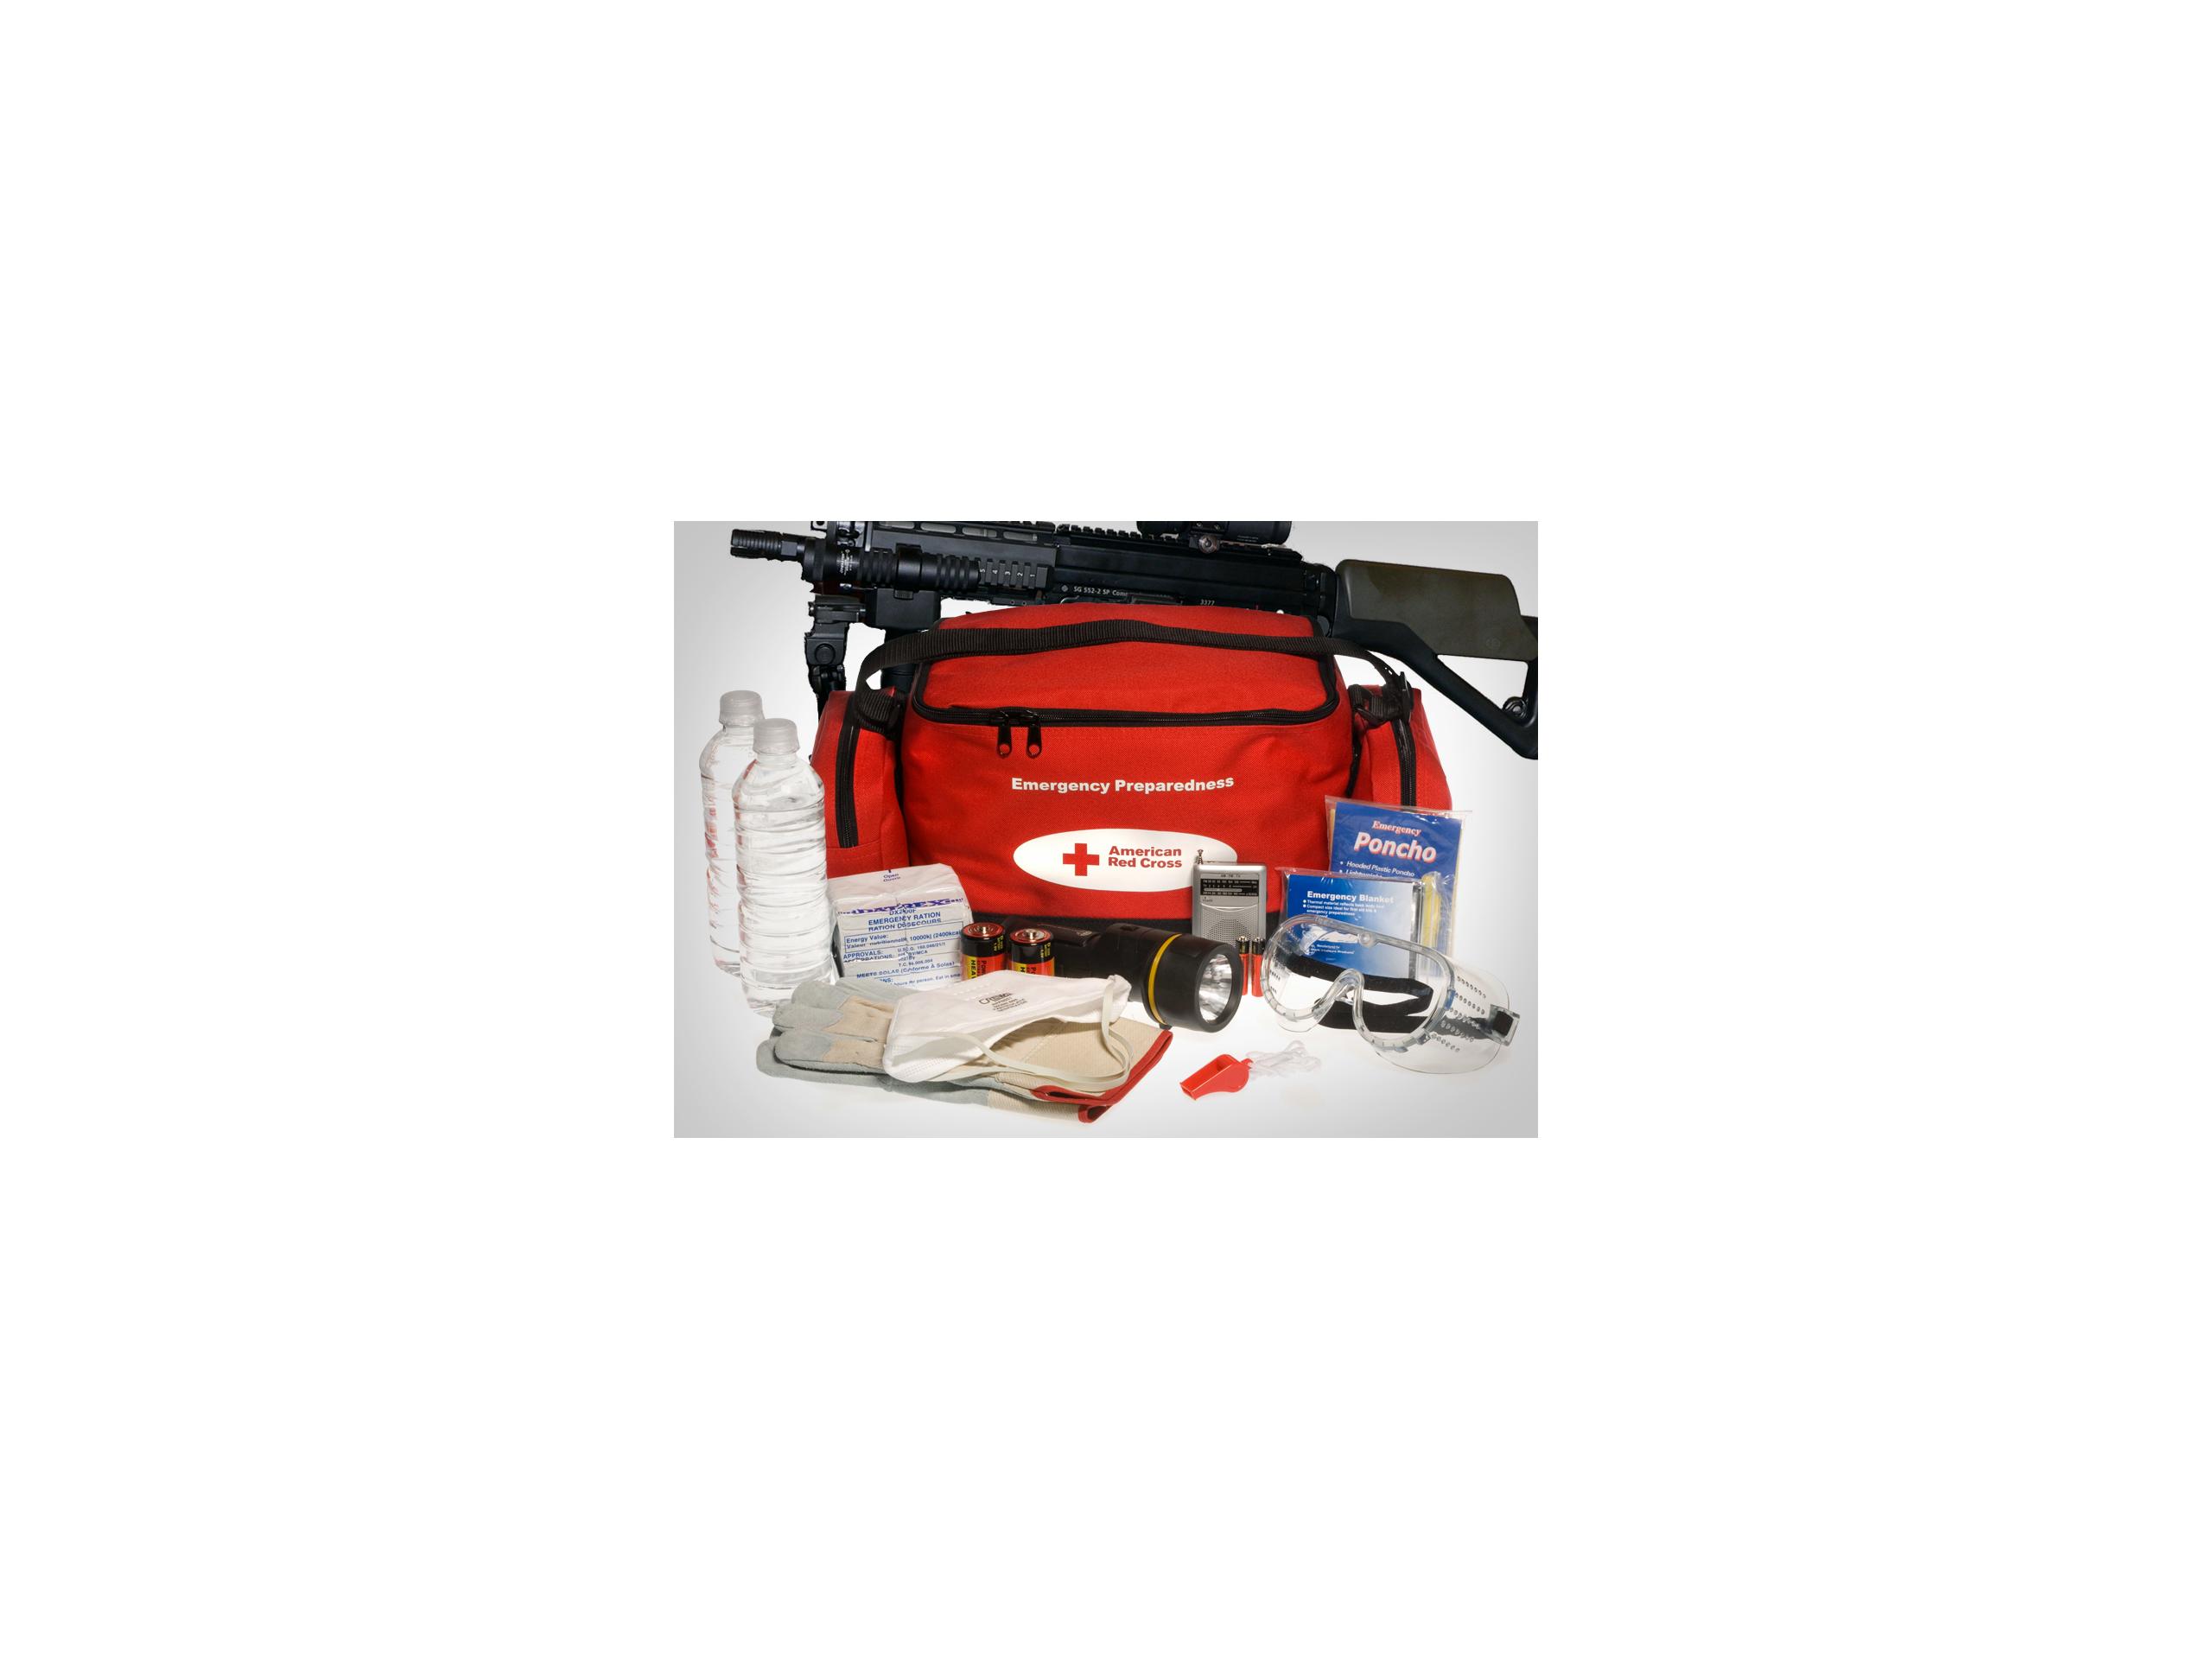 Medical kit and firearms